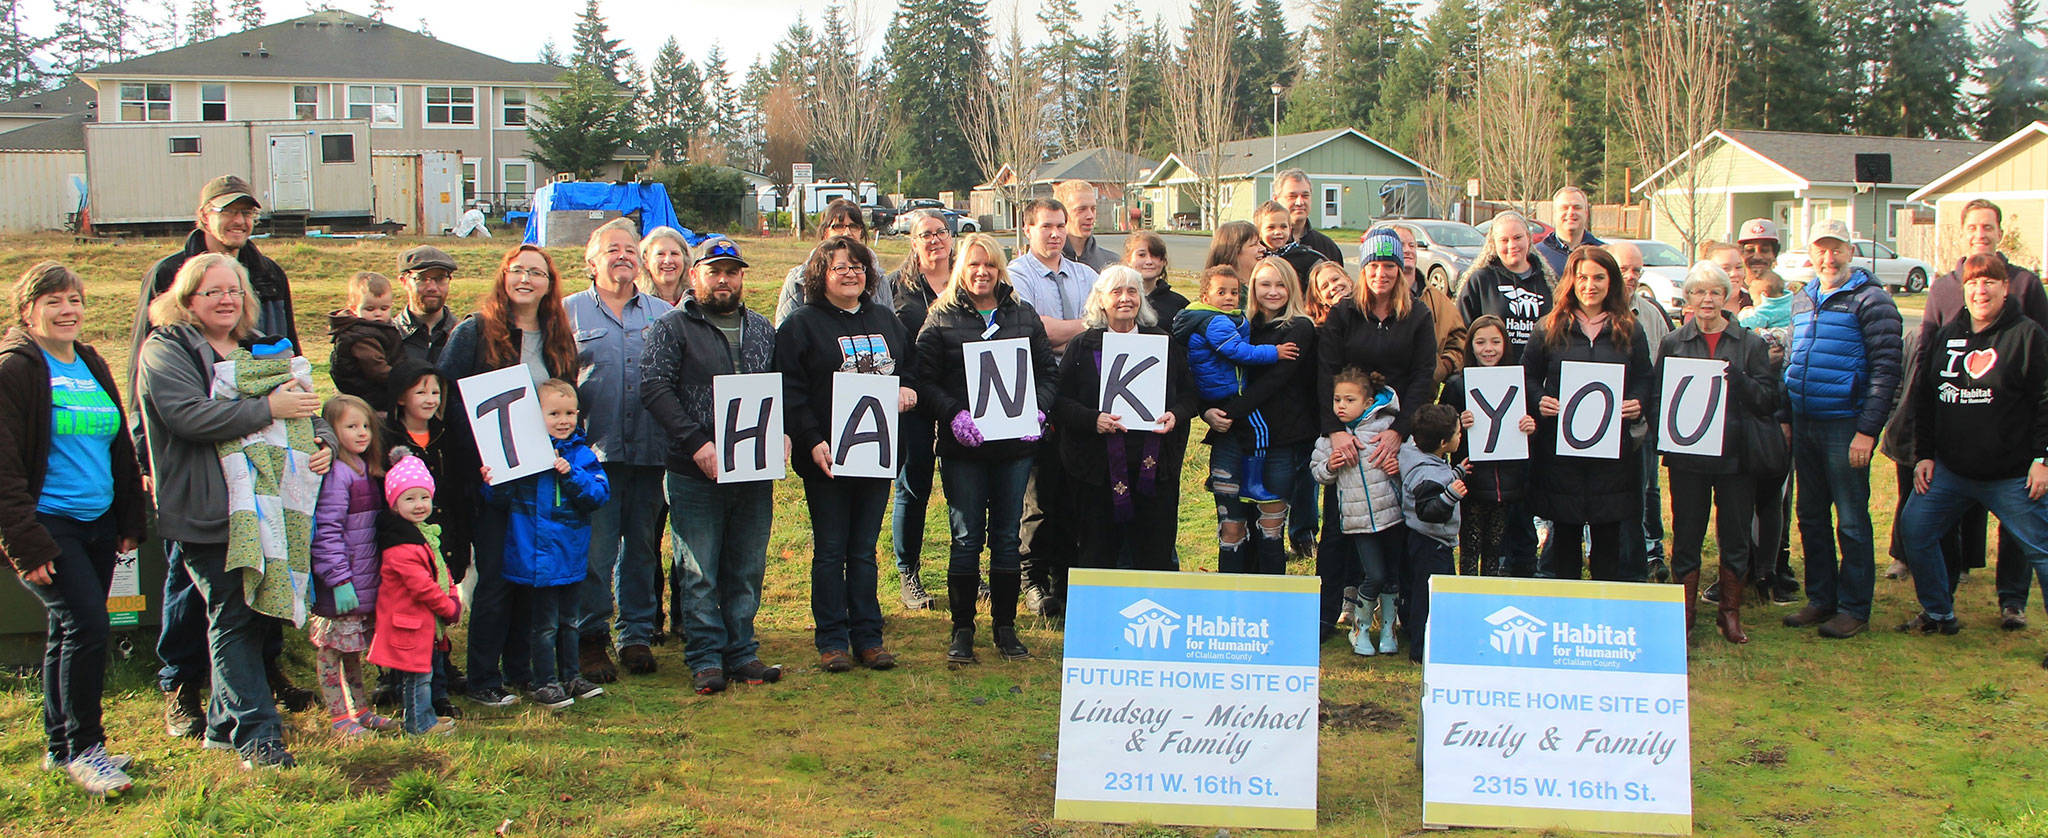 Community members gather together to commemorate breaking ground on two new homes in Port Angeles for two local families. (Habitat for Humanity of Clallam County)